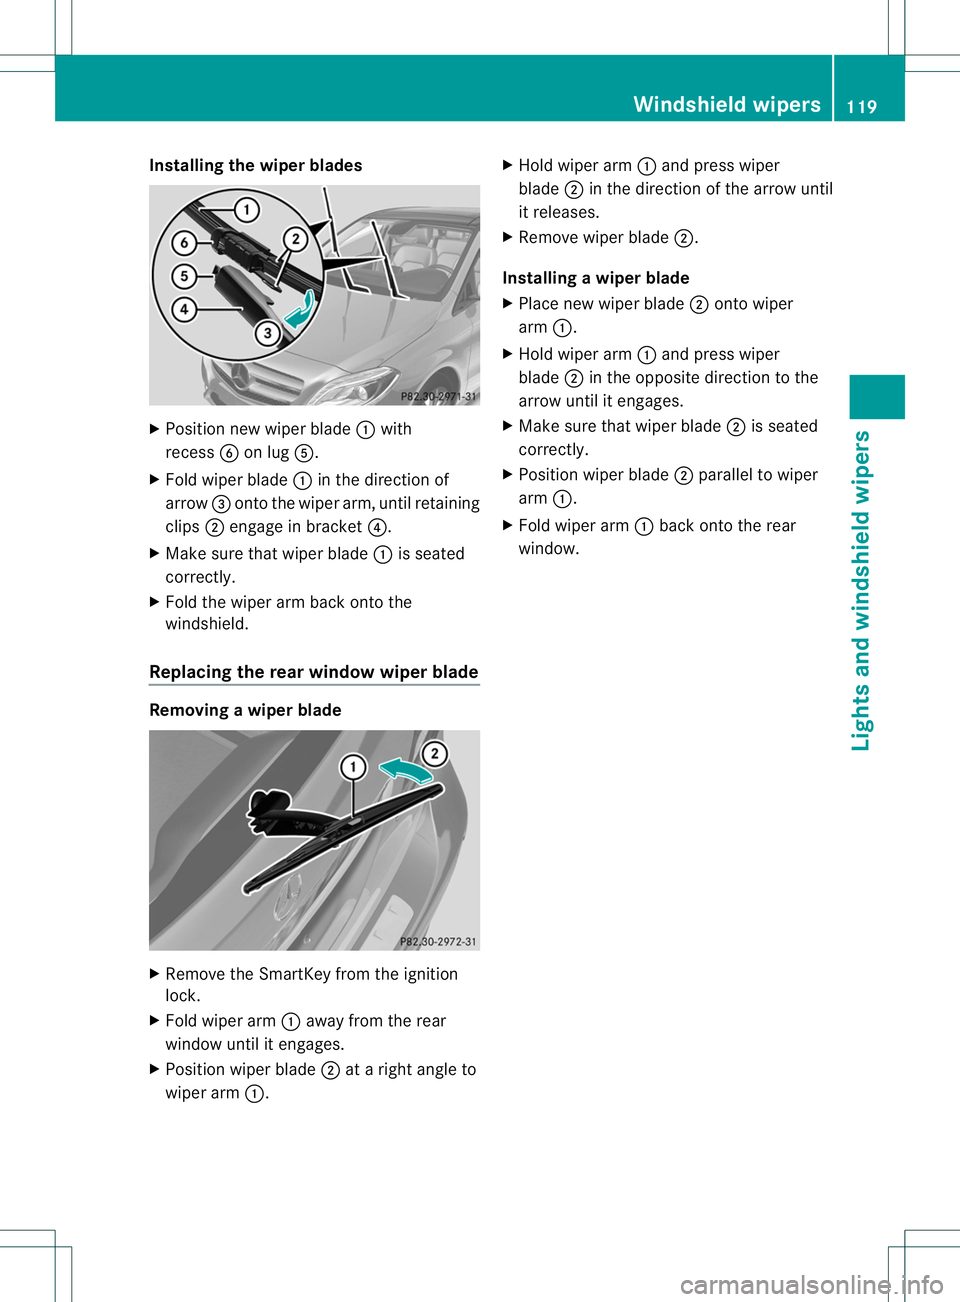 MERCEDES-BENZ B-CLASS SPORTS 2014  Owners Manual Installing th
ewiper blades X
Positio nnew wiper blade 001Awith
recess 0024on lug 001E.
X Fold wiper blade 001Ain the direction of
arrow 0023ontot he wiper arm, until retaining
clips 0010engage in bra